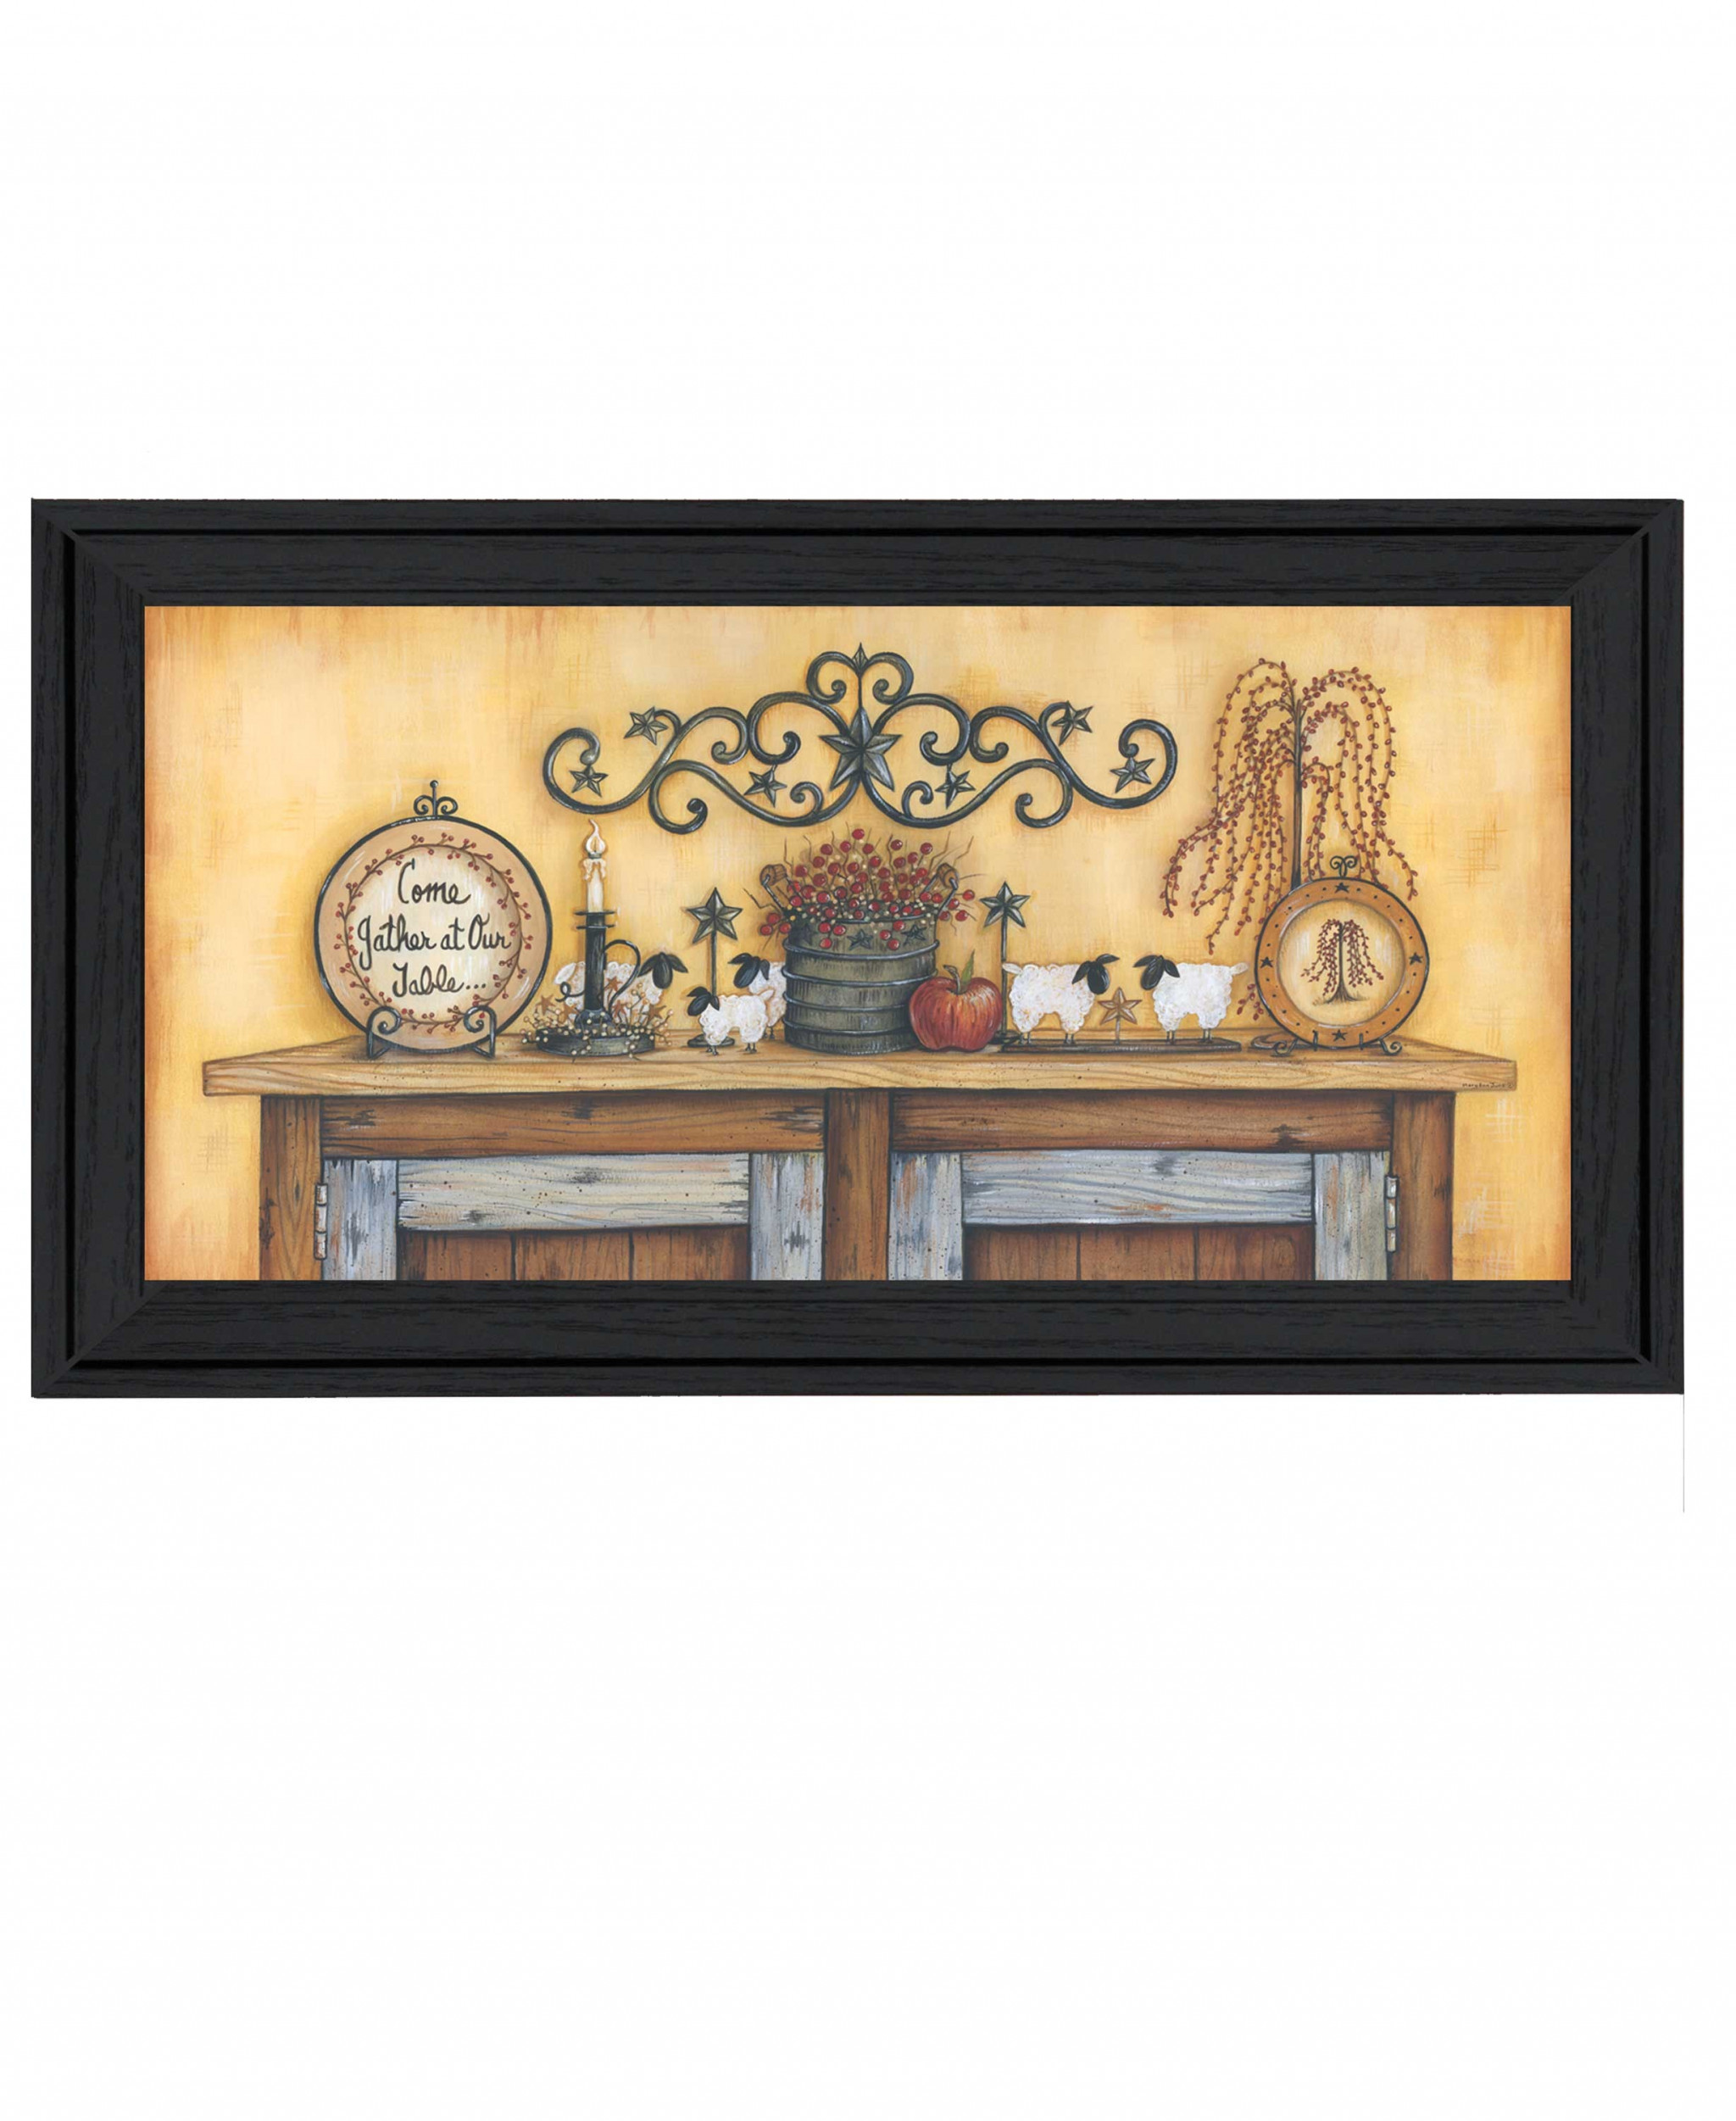 Come Gather At Our Table 4 Black Framed Print Wall Art-407801-1